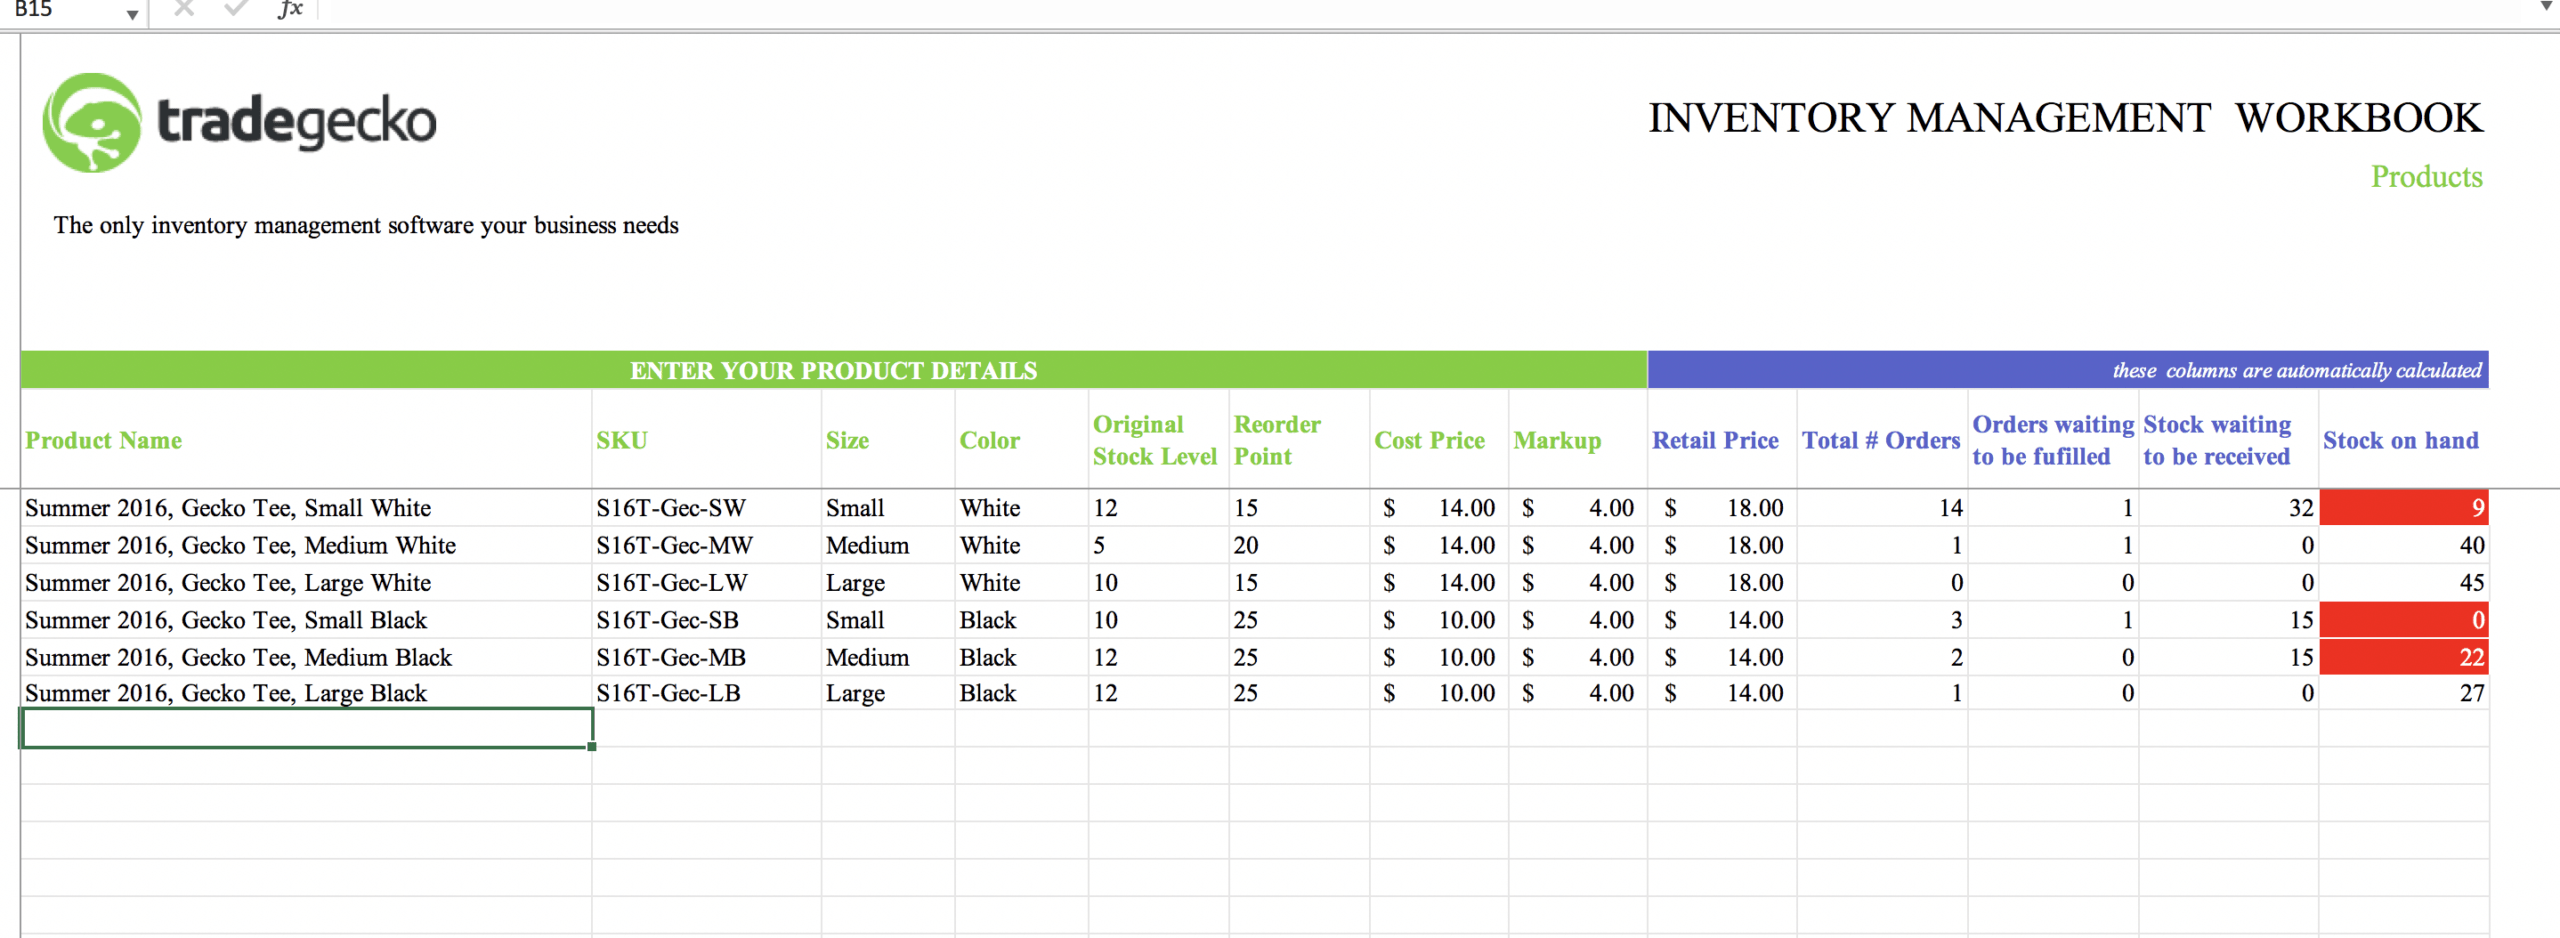 Top 10 Inventory Excel Tracking Templates – Sheetgo Blog With Regard To Stock Report Template Excel